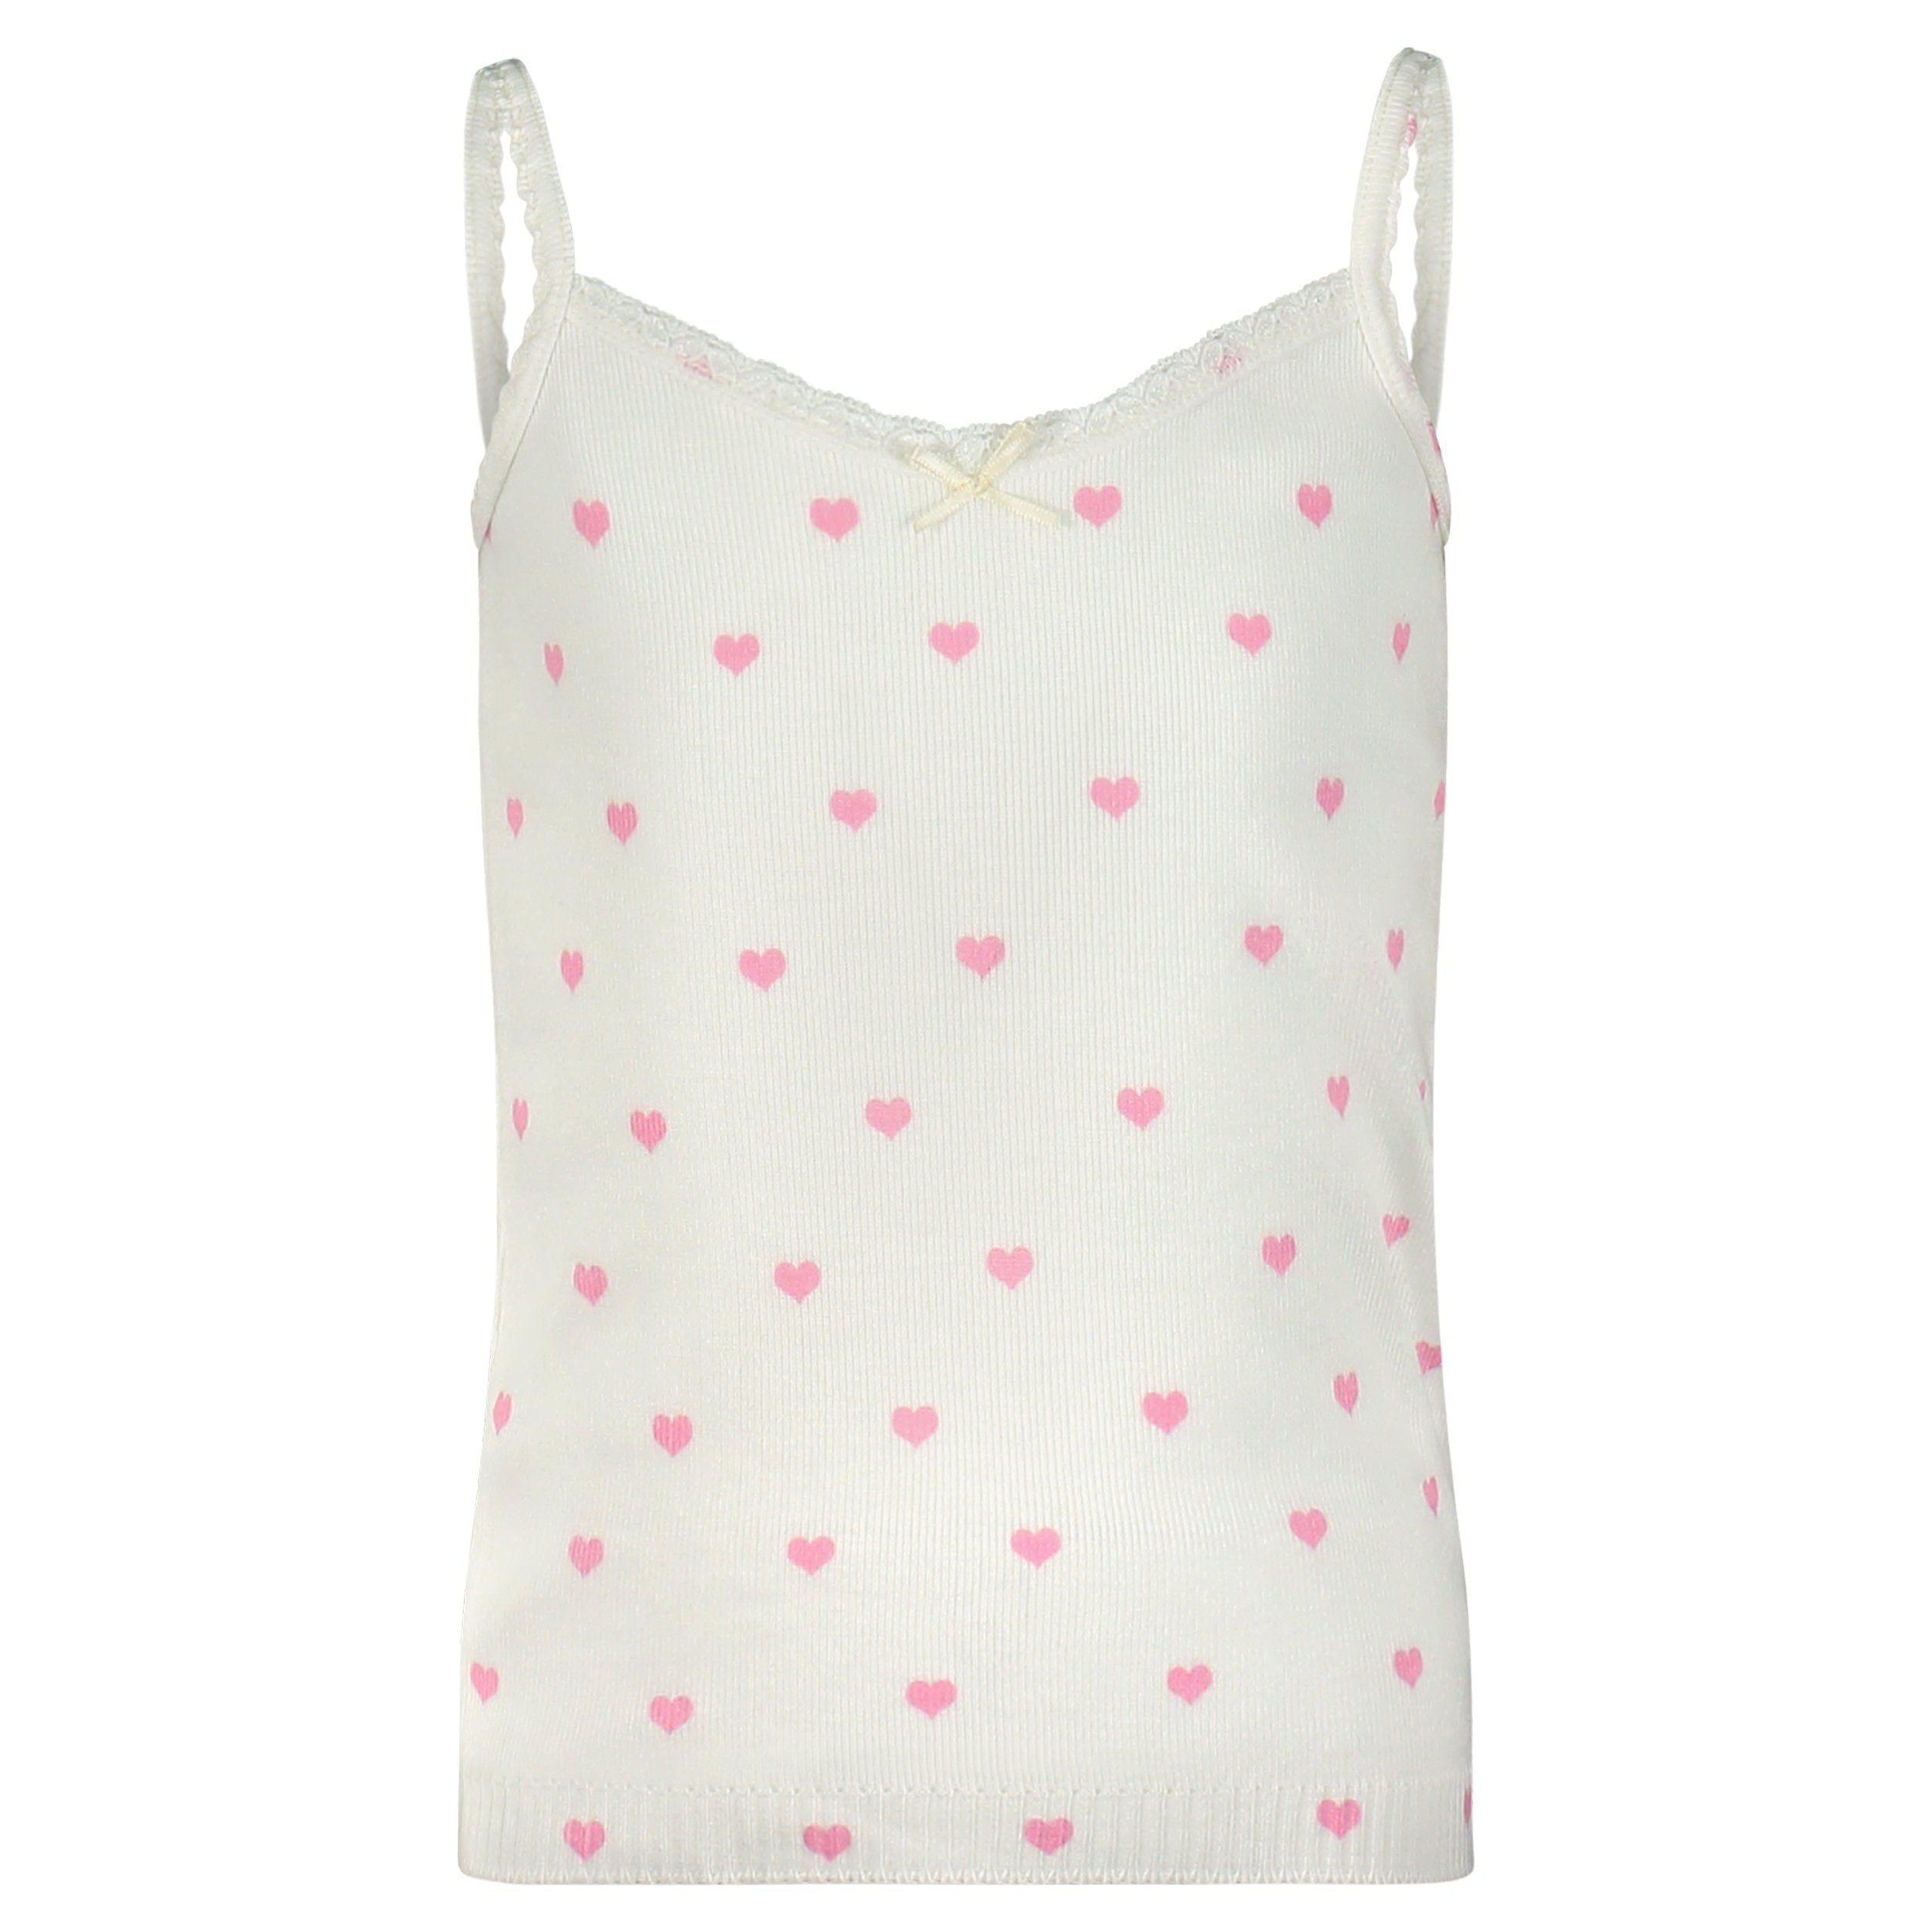 GIRLS Pink Hearts Print CAMISOLE w Lace